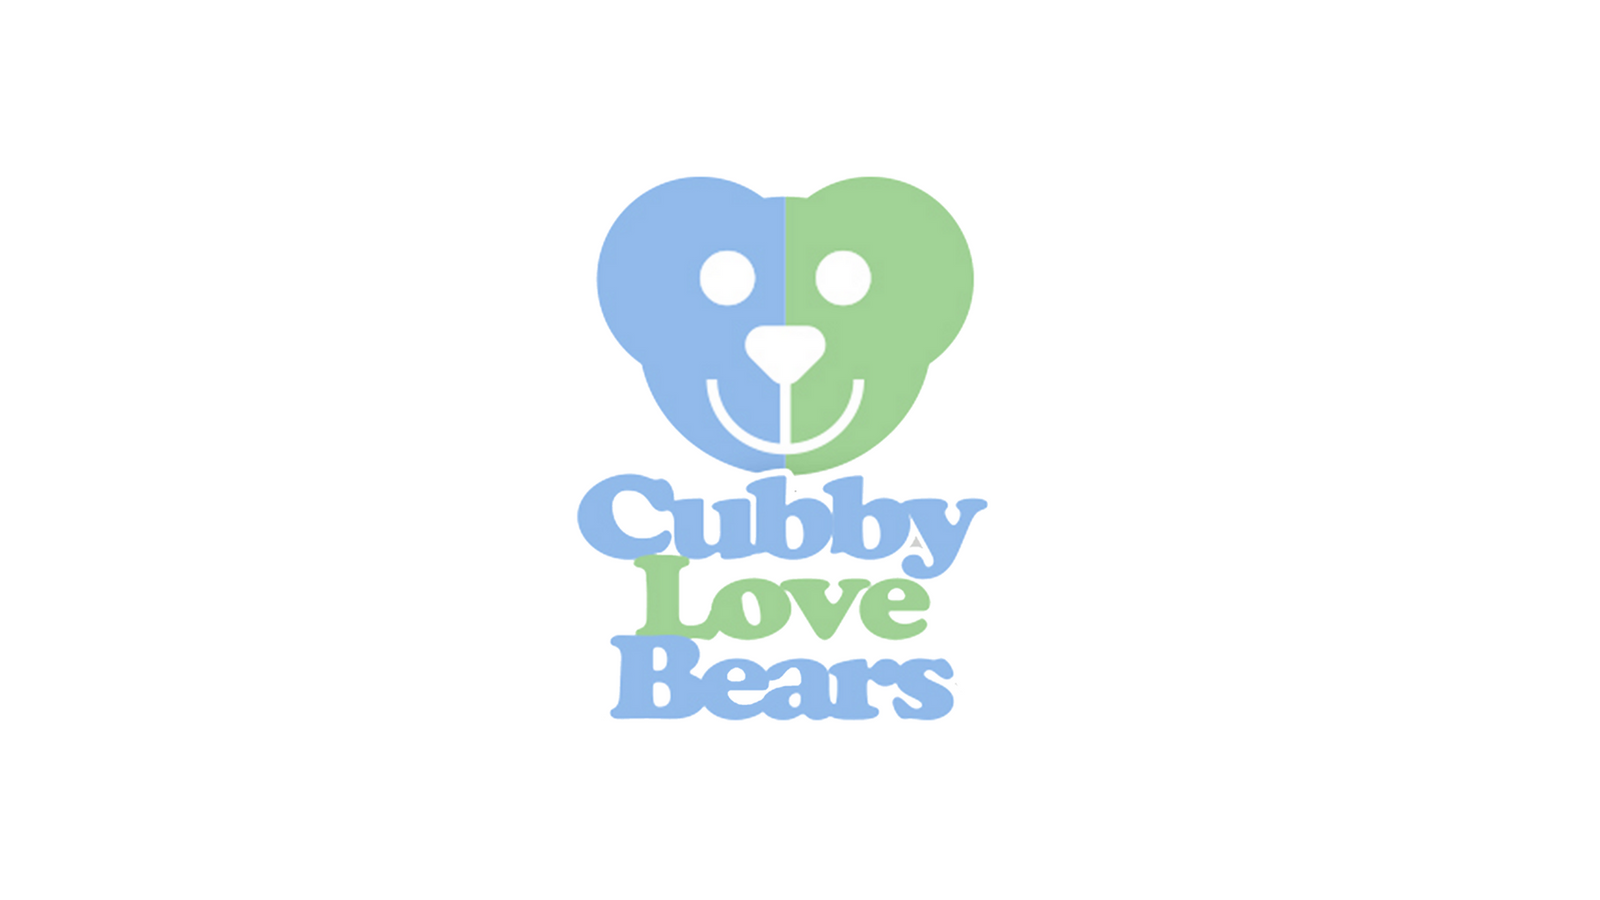 Learn With Our Cubby Love Bears